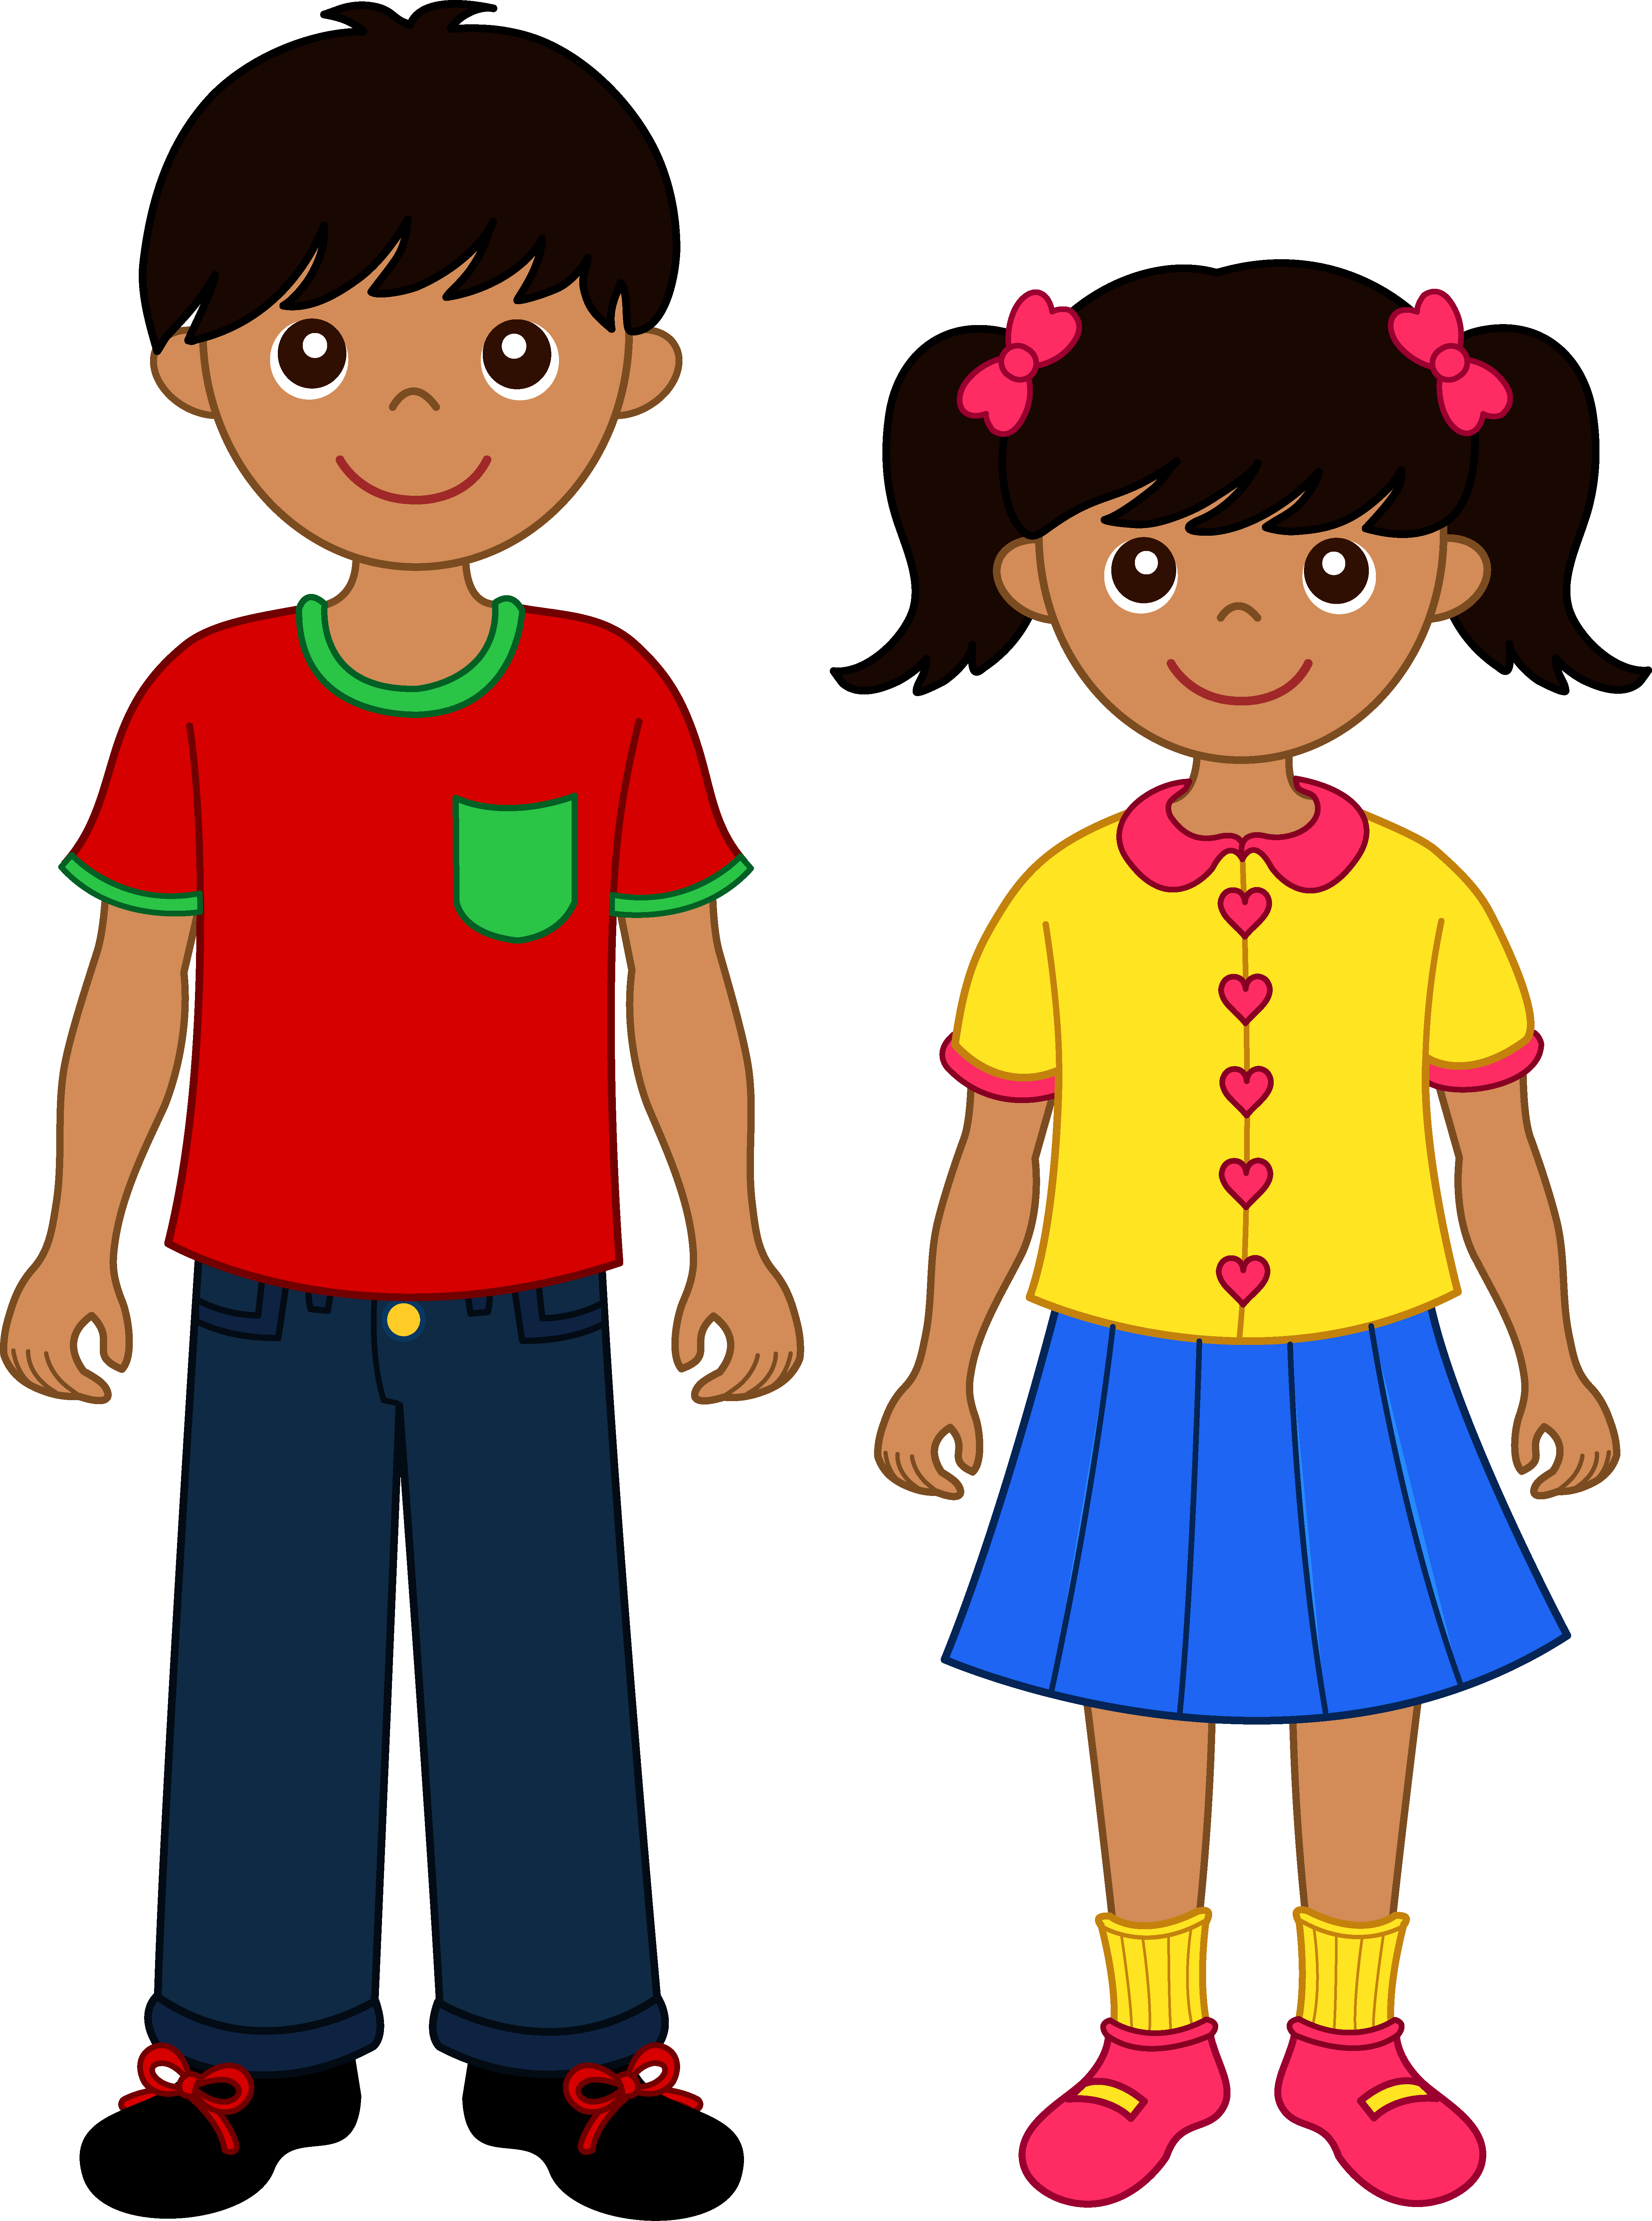 Older brother and sister clipart - ClipartFox